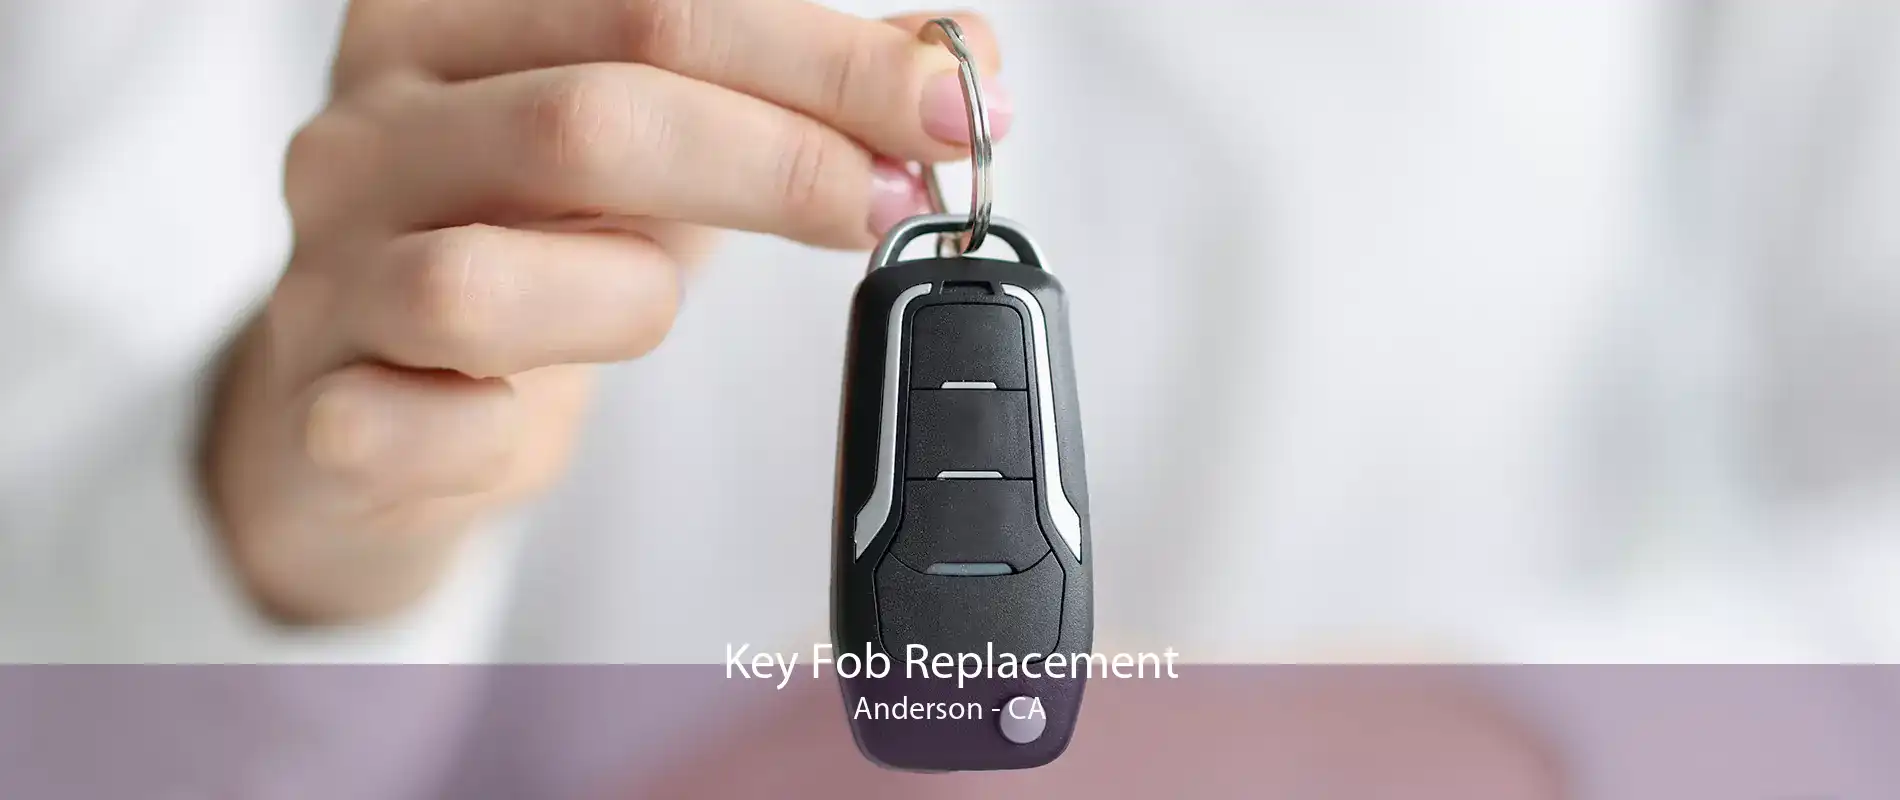 Key Fob Replacement Anderson - CA